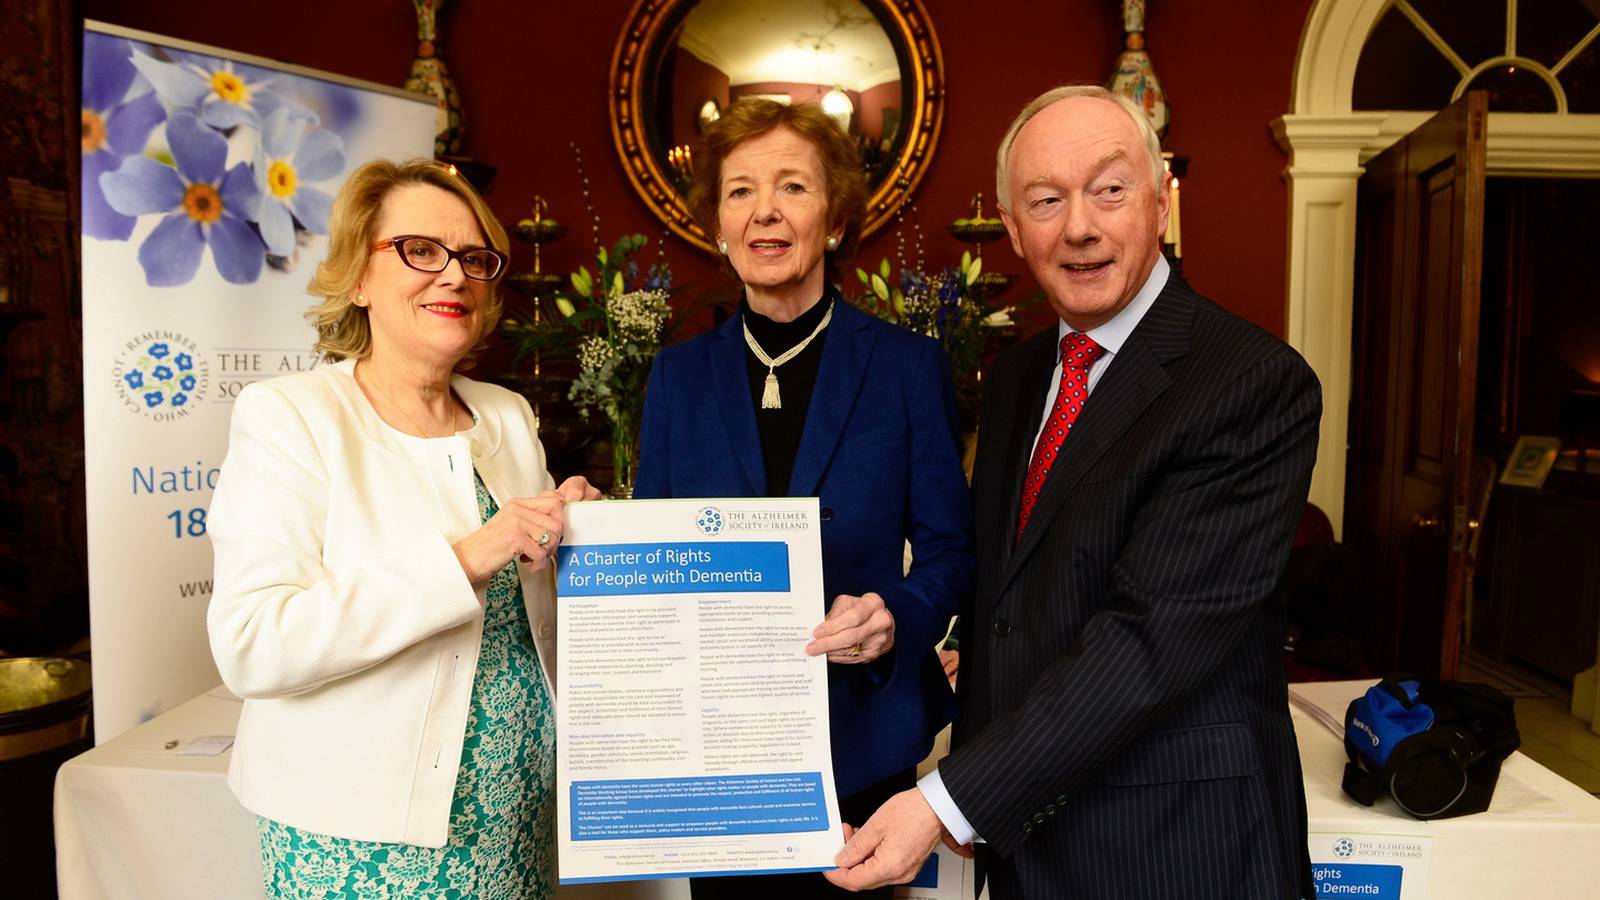 Charter aims to change view of dementia, says Mary Robinson – The Irish ...